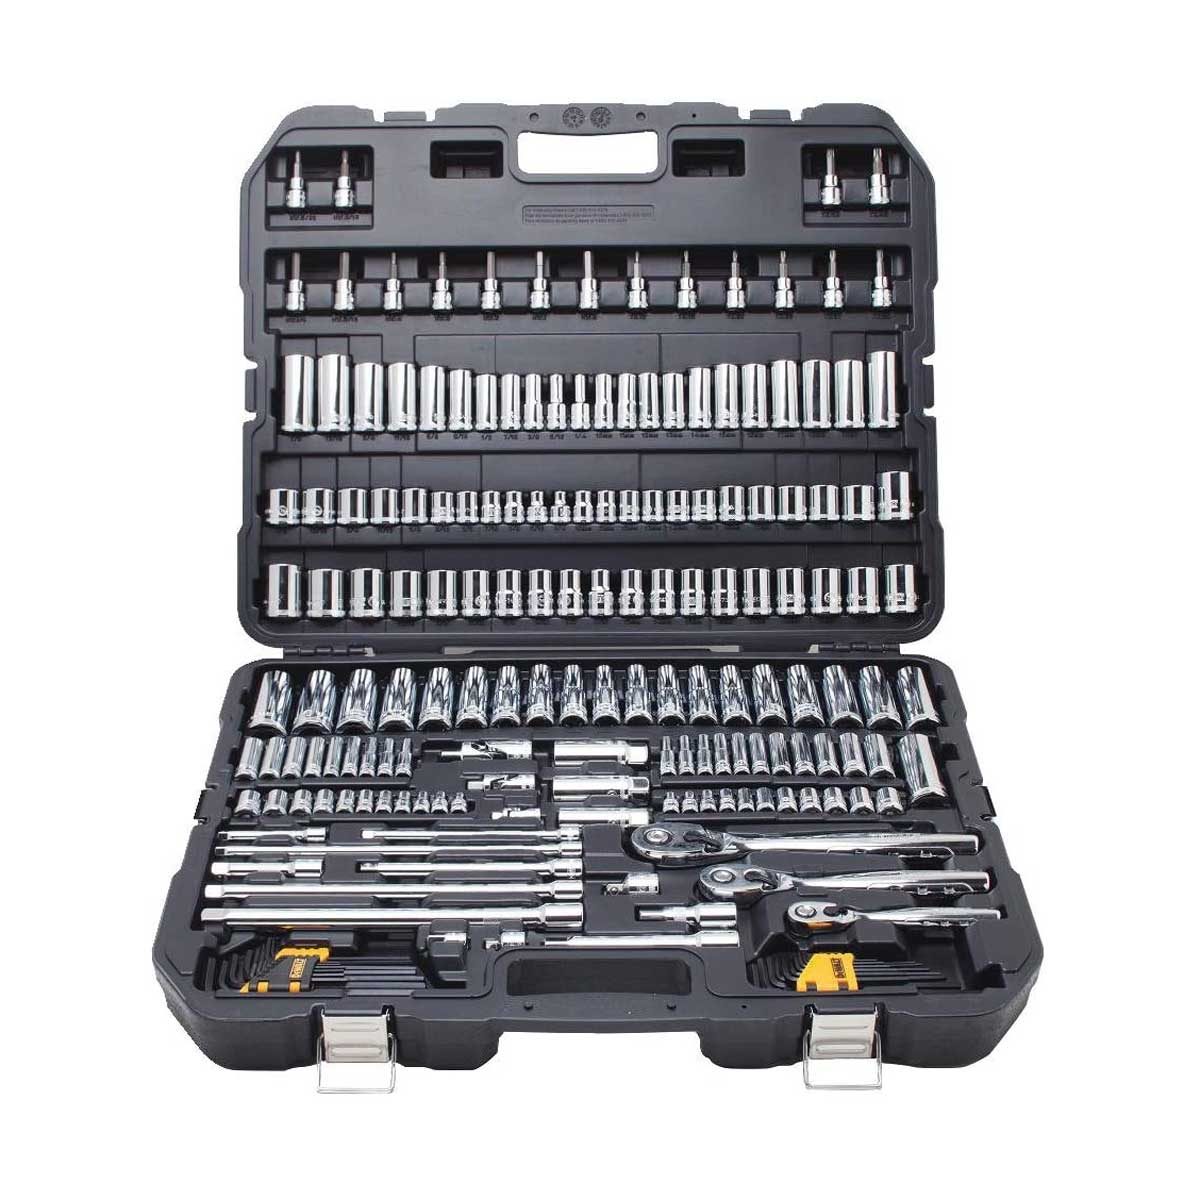 15 Tools You Need in Your Auto Repair Tool Kit